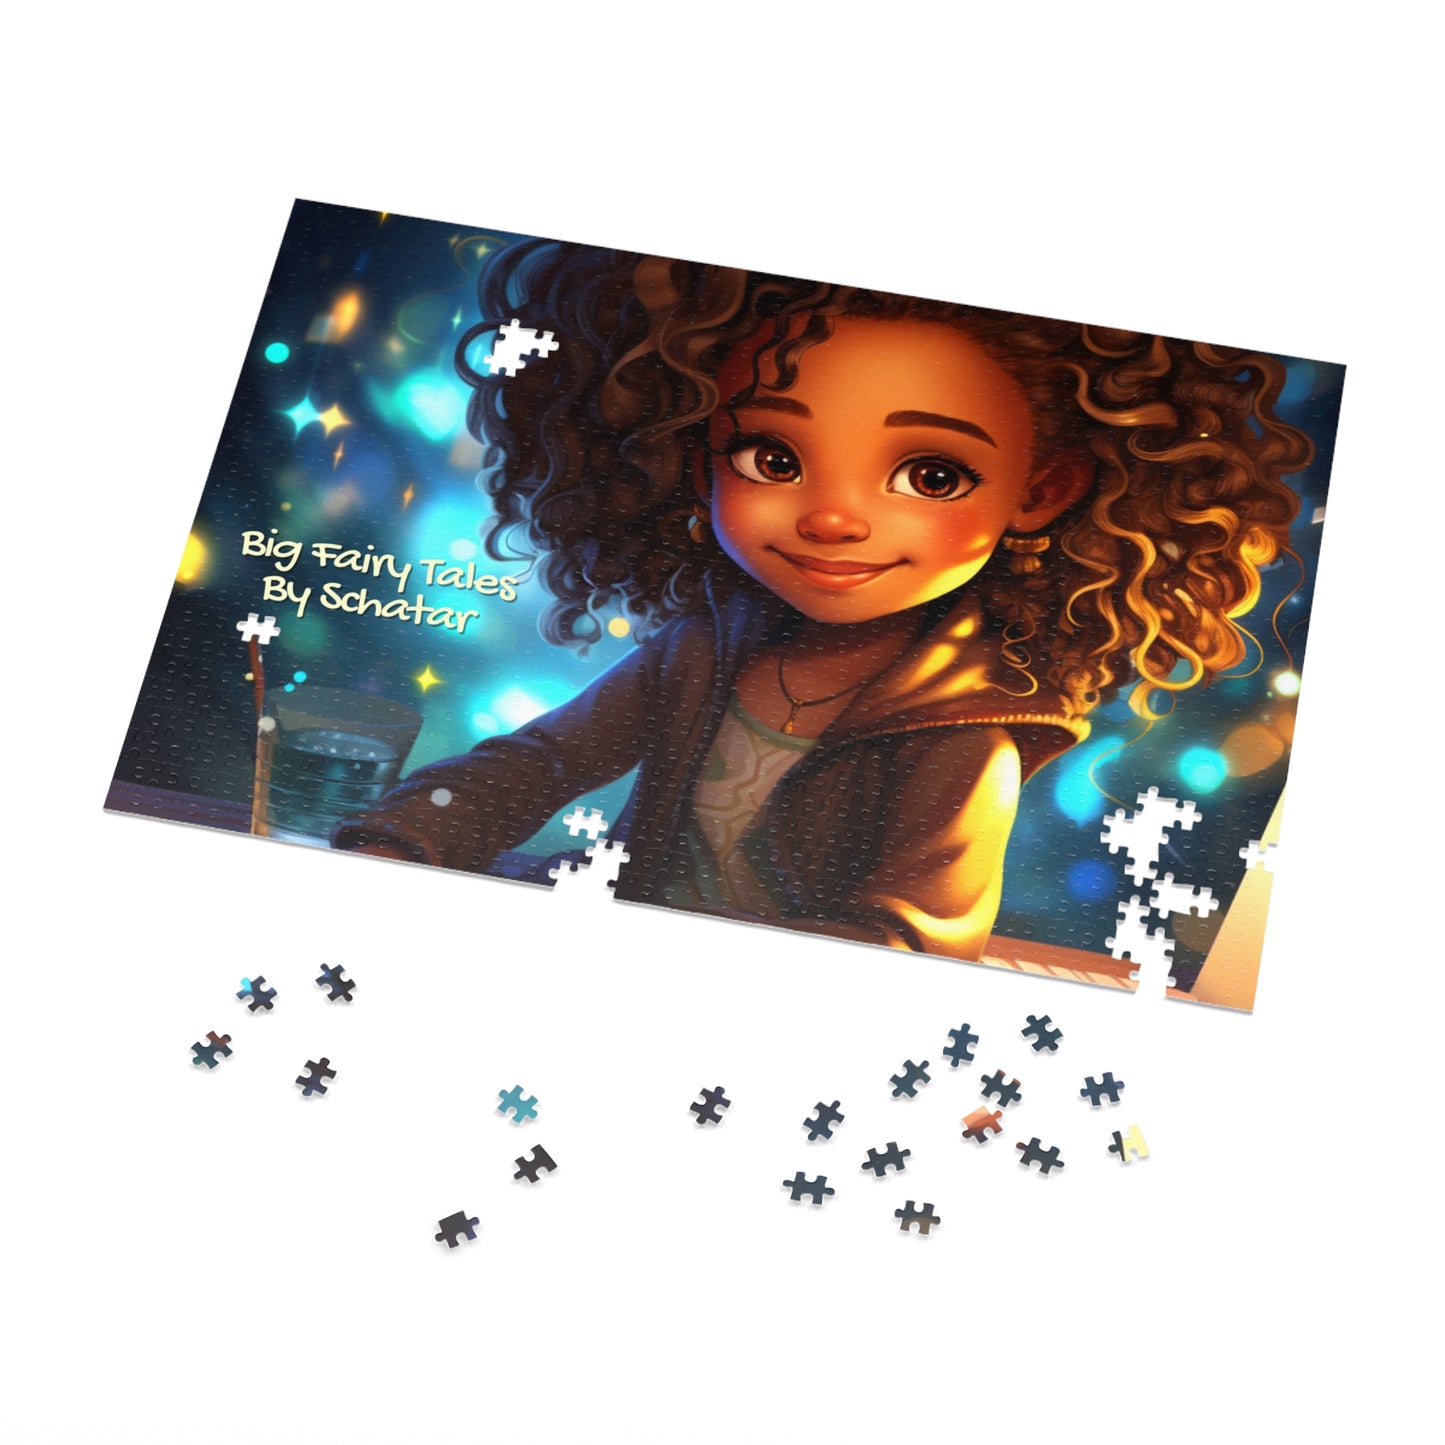 CEO - Big Little Professionals Puzzle 22 From Big Fairy Tales By Schatar